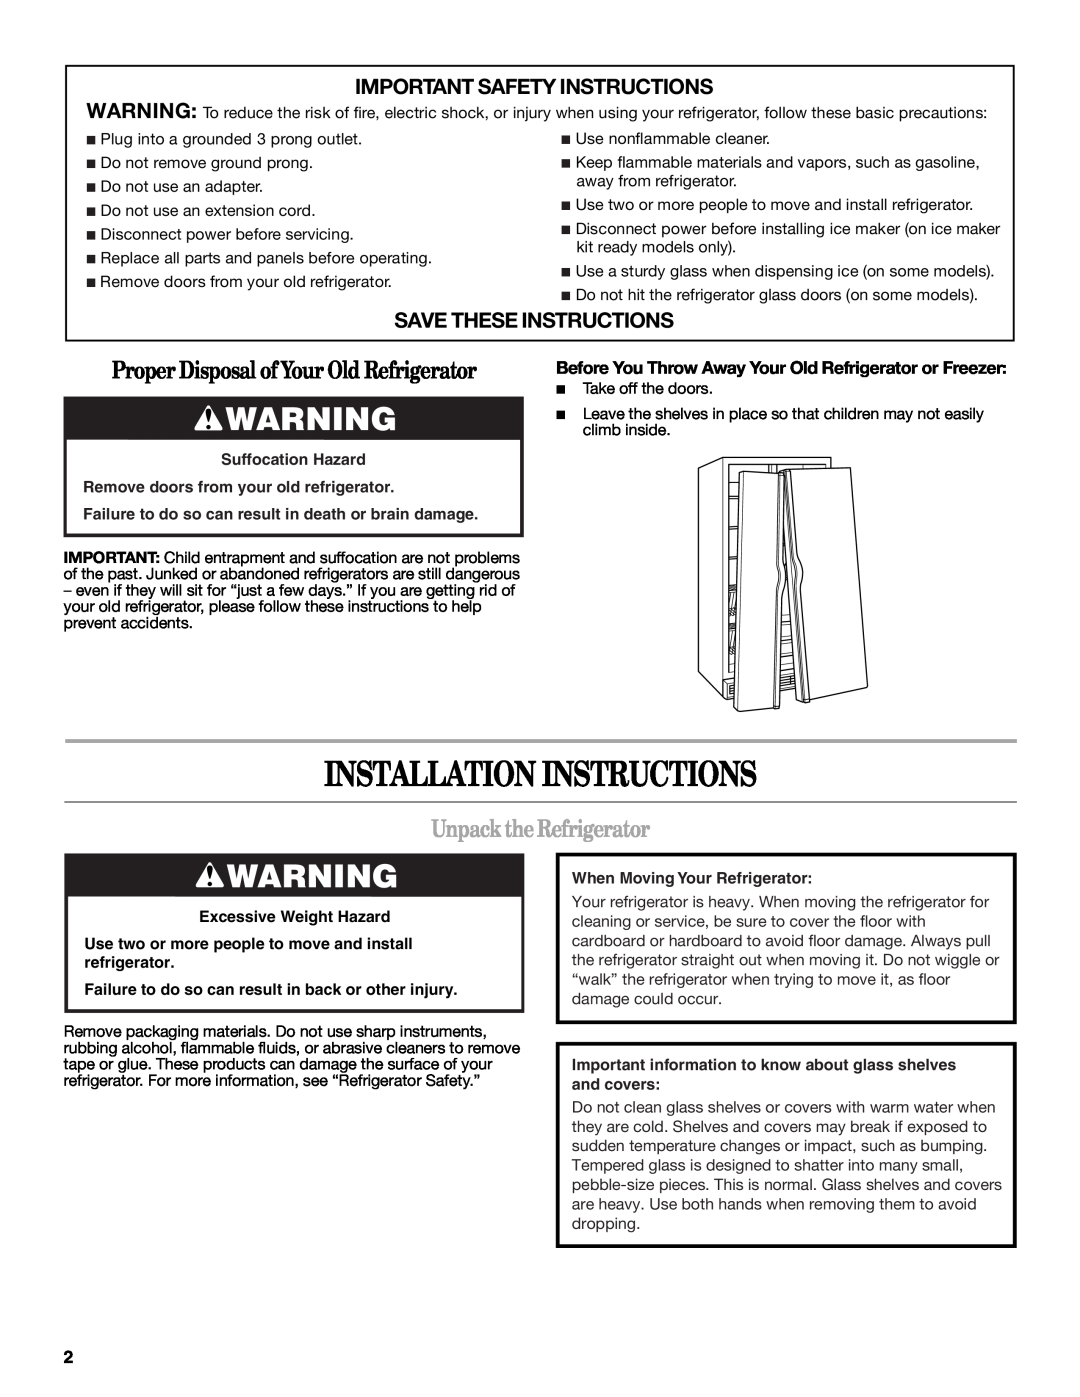 Whirlpool W10321467A Installation Instructions, Unpack the Refrigerator, Important Safety Instructions 